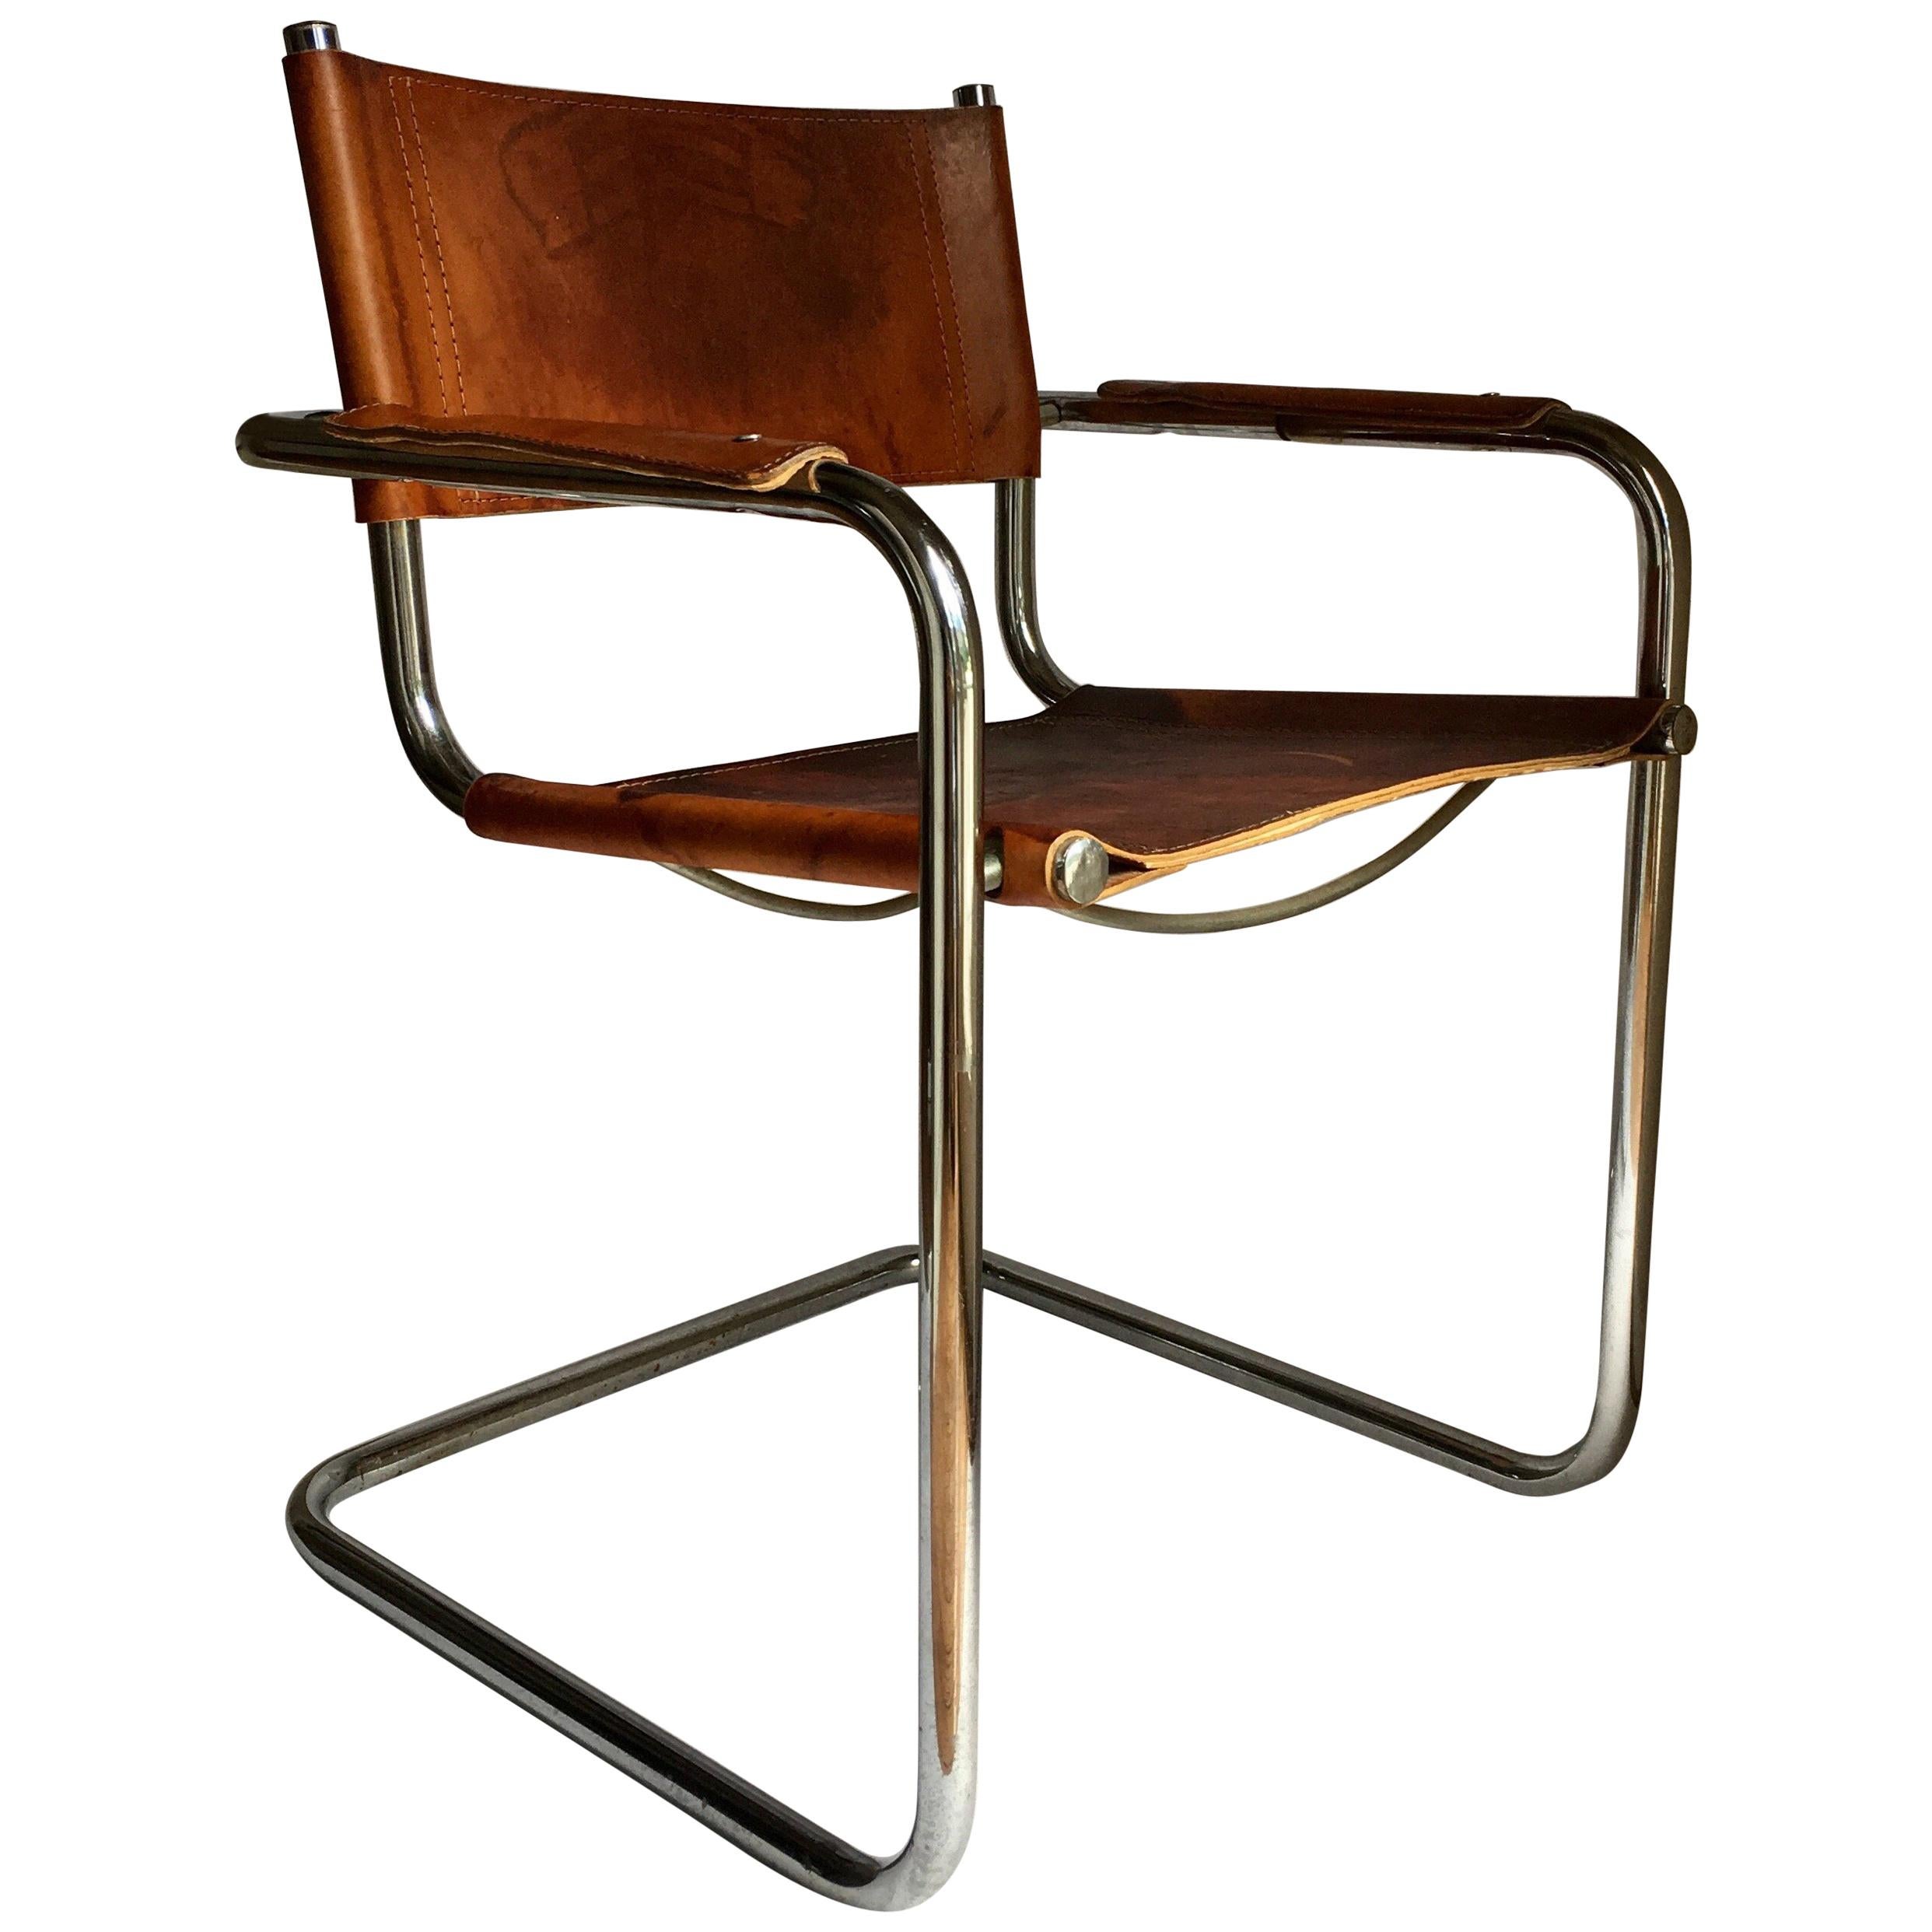 Mid-Century Modern Cantilevered Chrome and Cognac Leather Sling Armchair